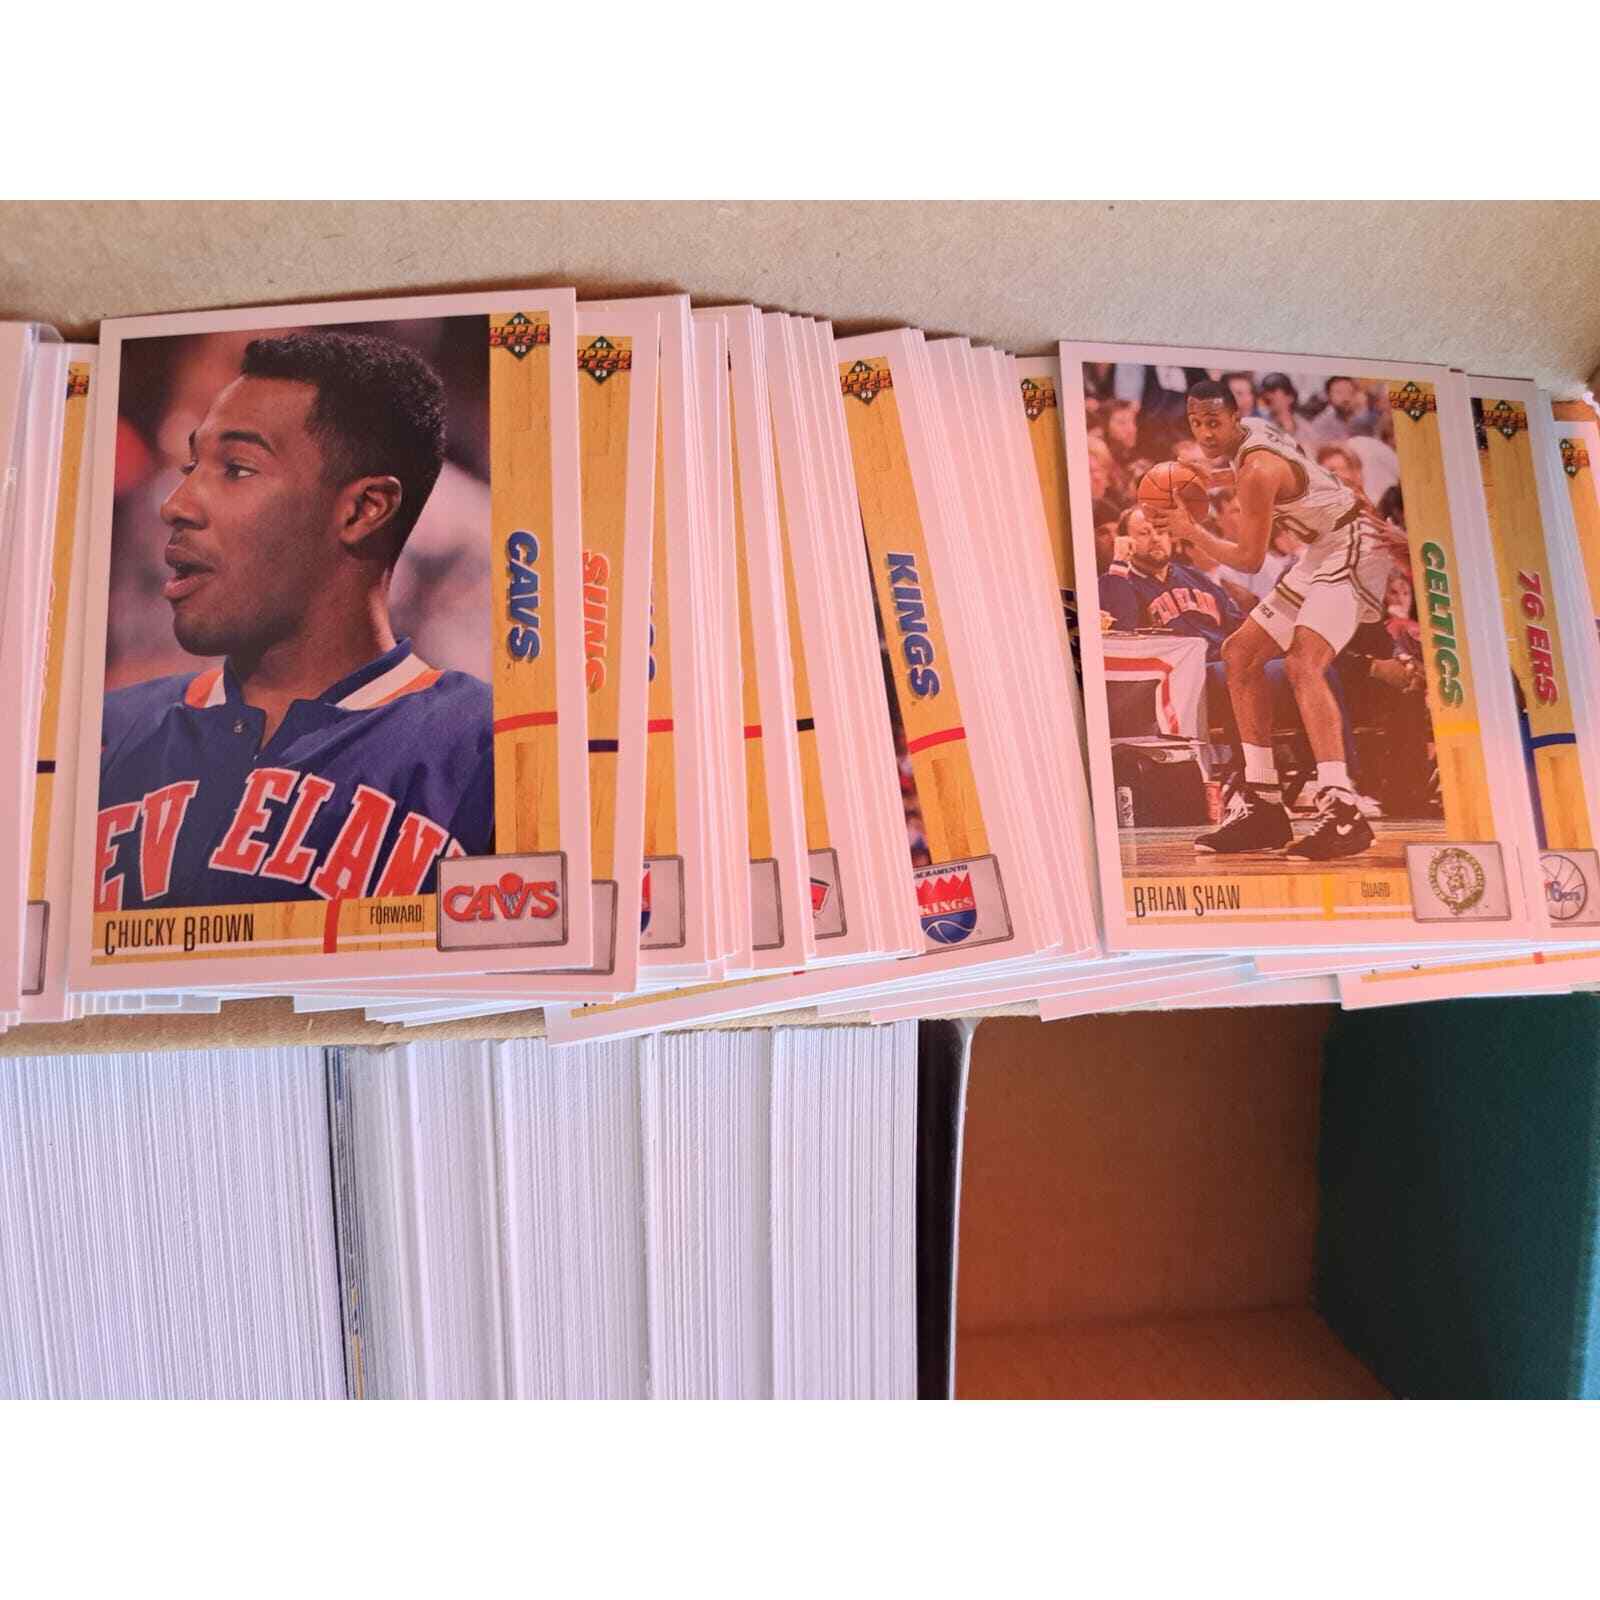 Upper Deck NBA BasketBall Trading Cards Boxed Set 1993-94 Great Condition